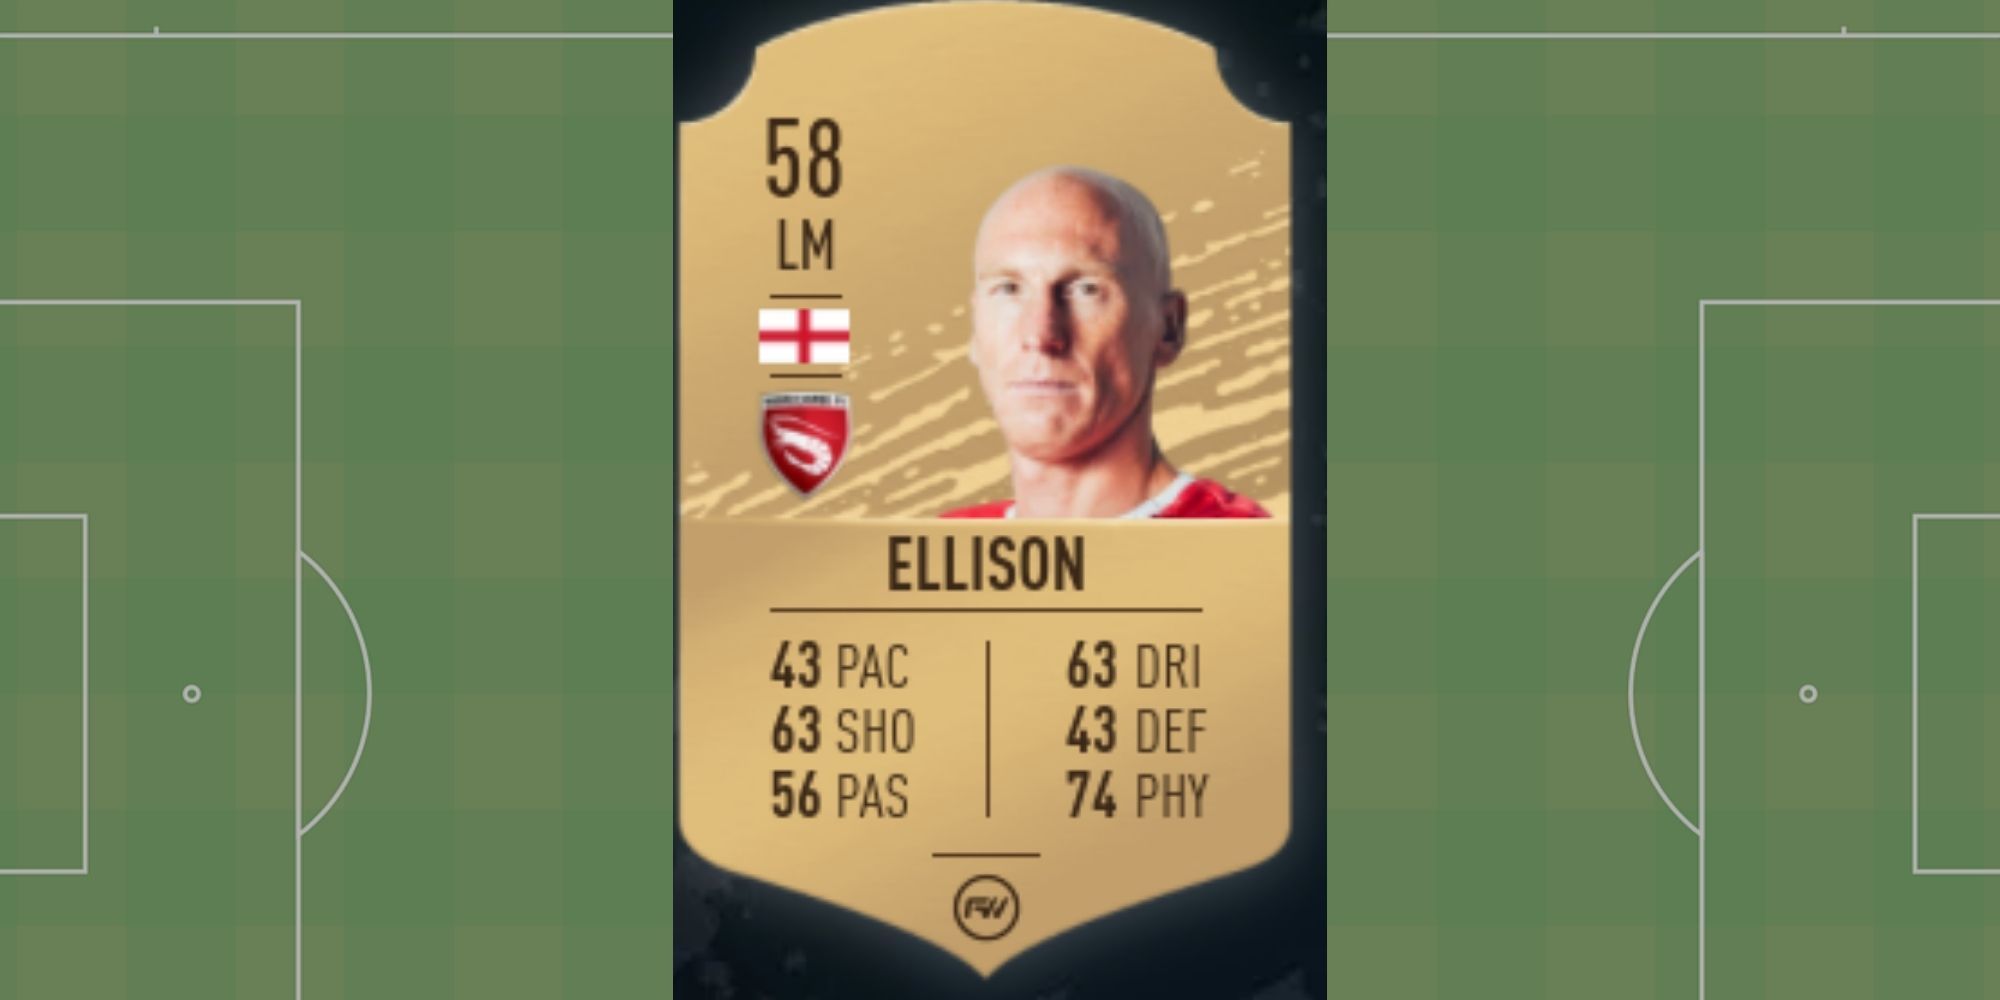 An image of Kevin Ellison's FUT card on FIFA 22.